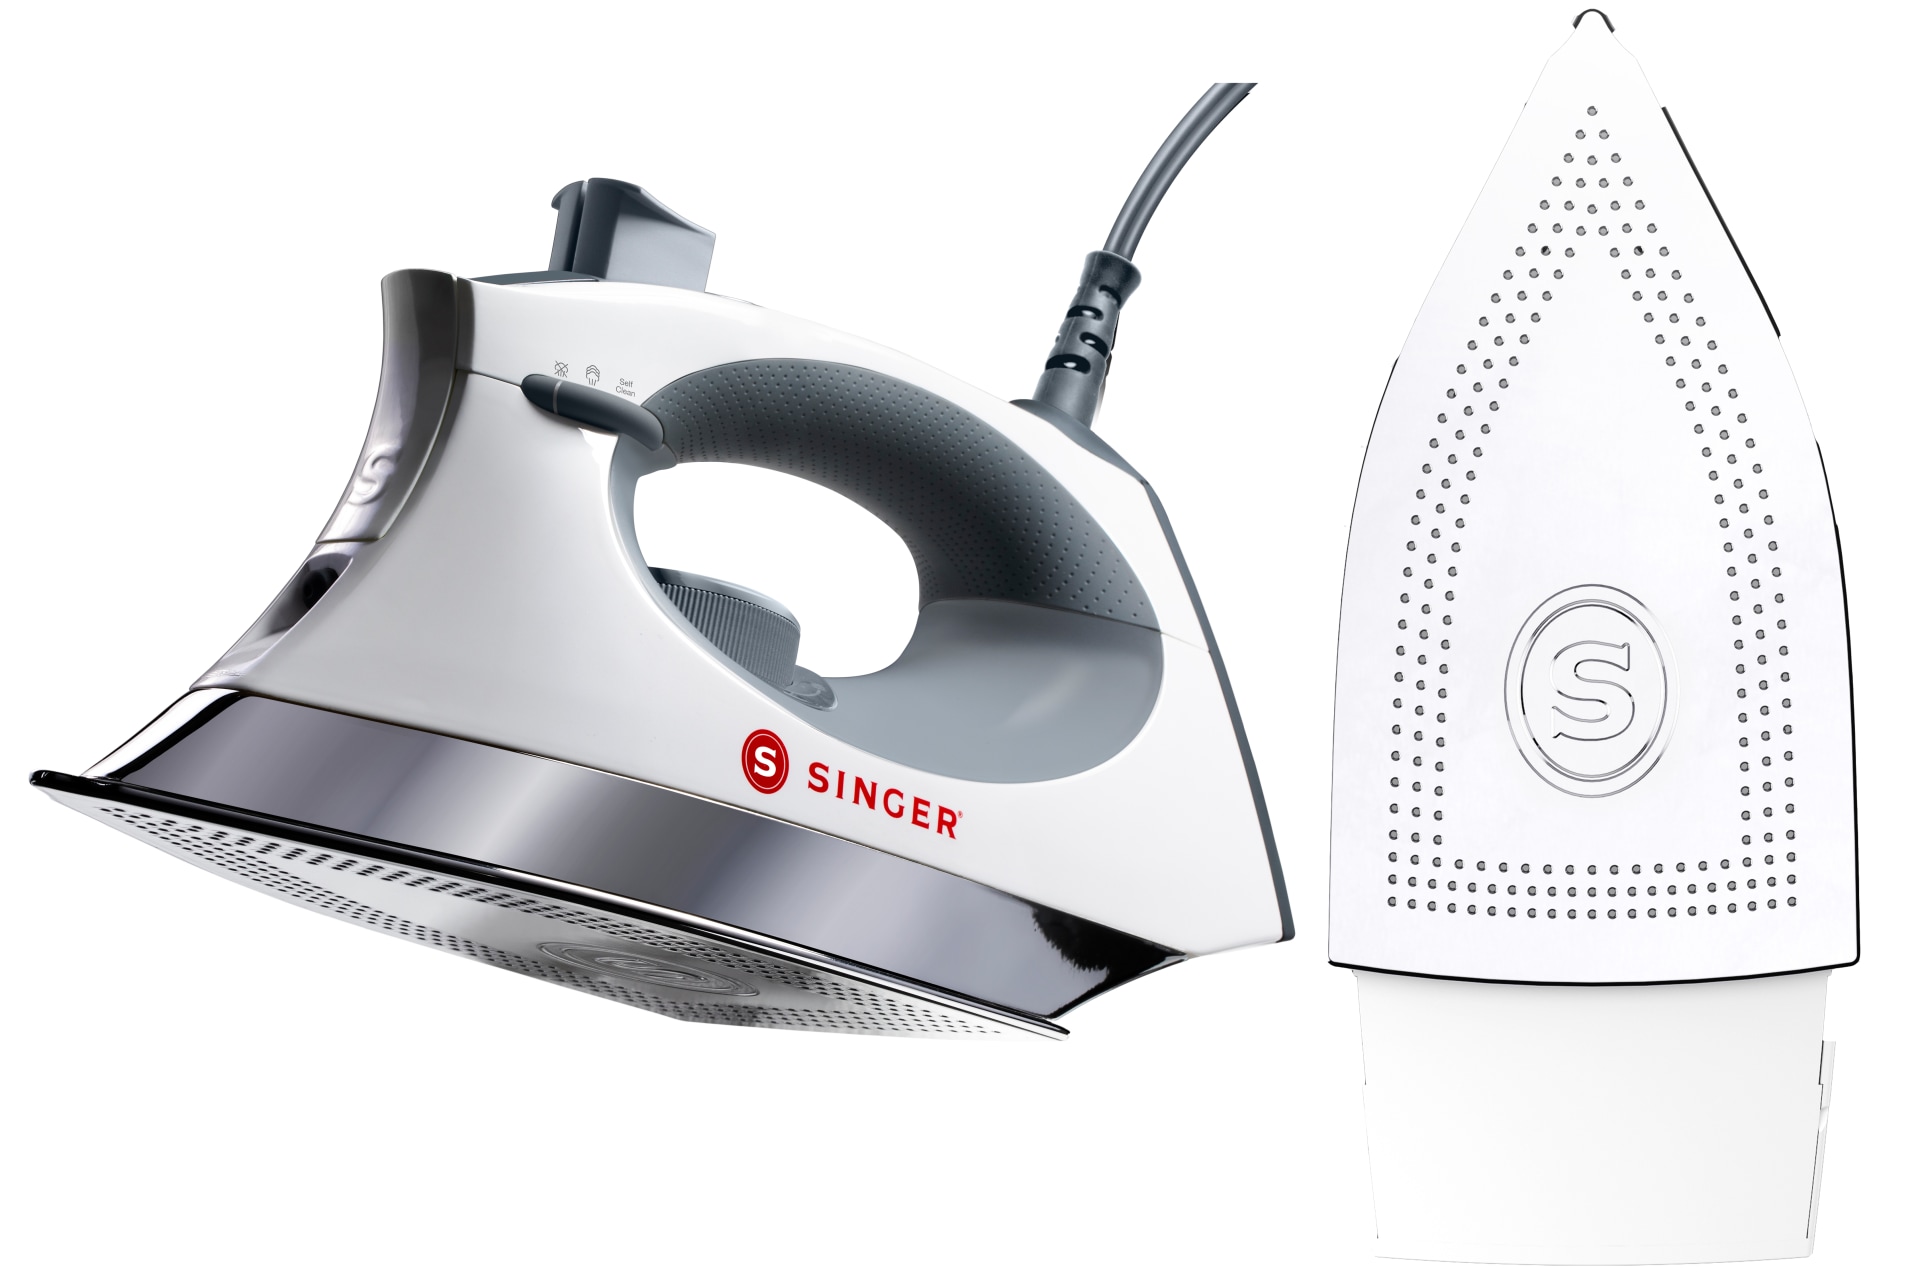 Singer Steam Iron - Deluxe - Vendella - Specialists in Hospitality